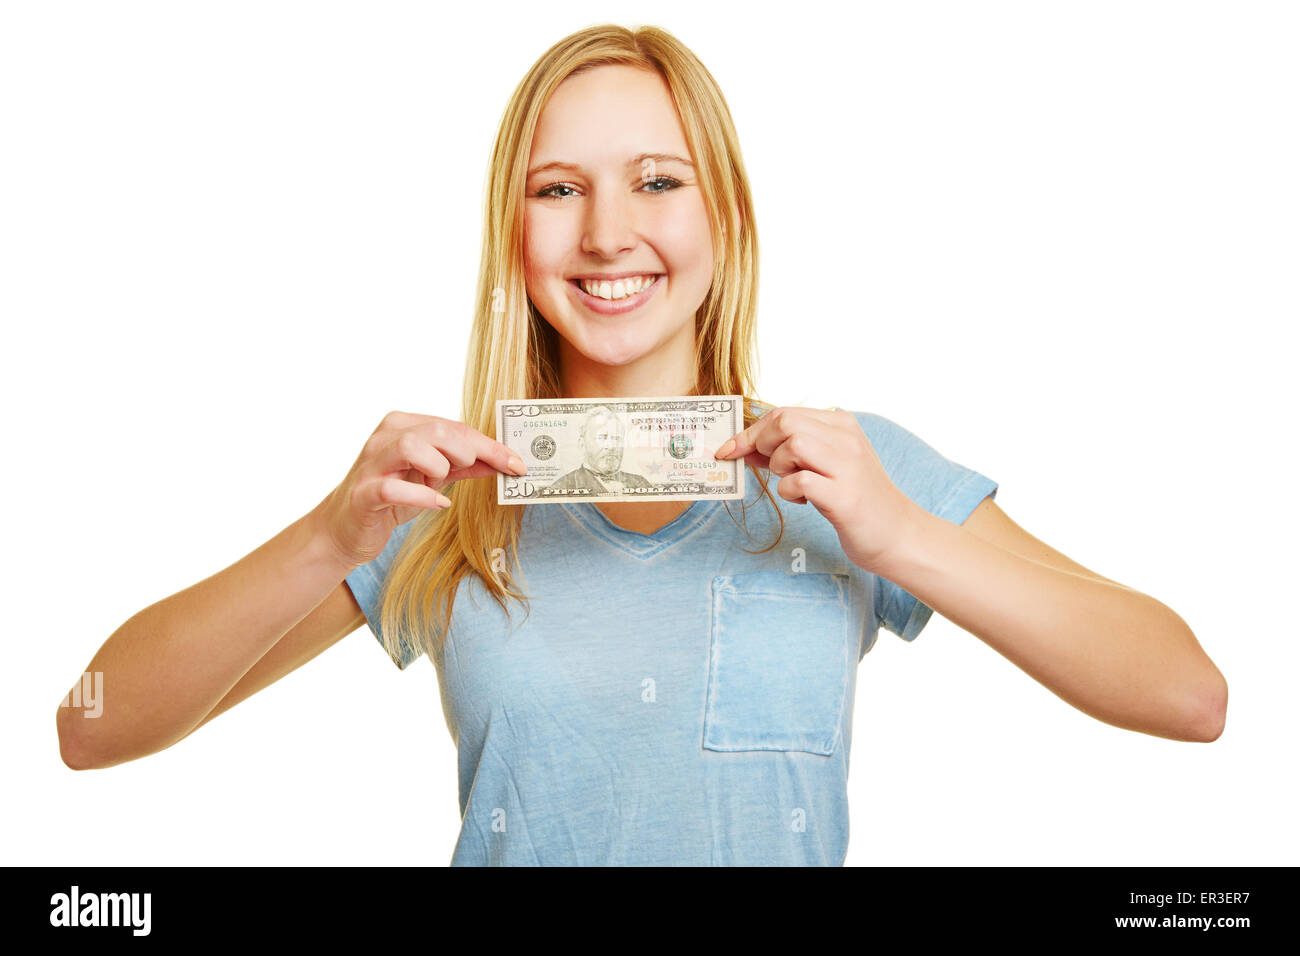 Happy woman holding 50 dollar bill in her hands Stock Photo